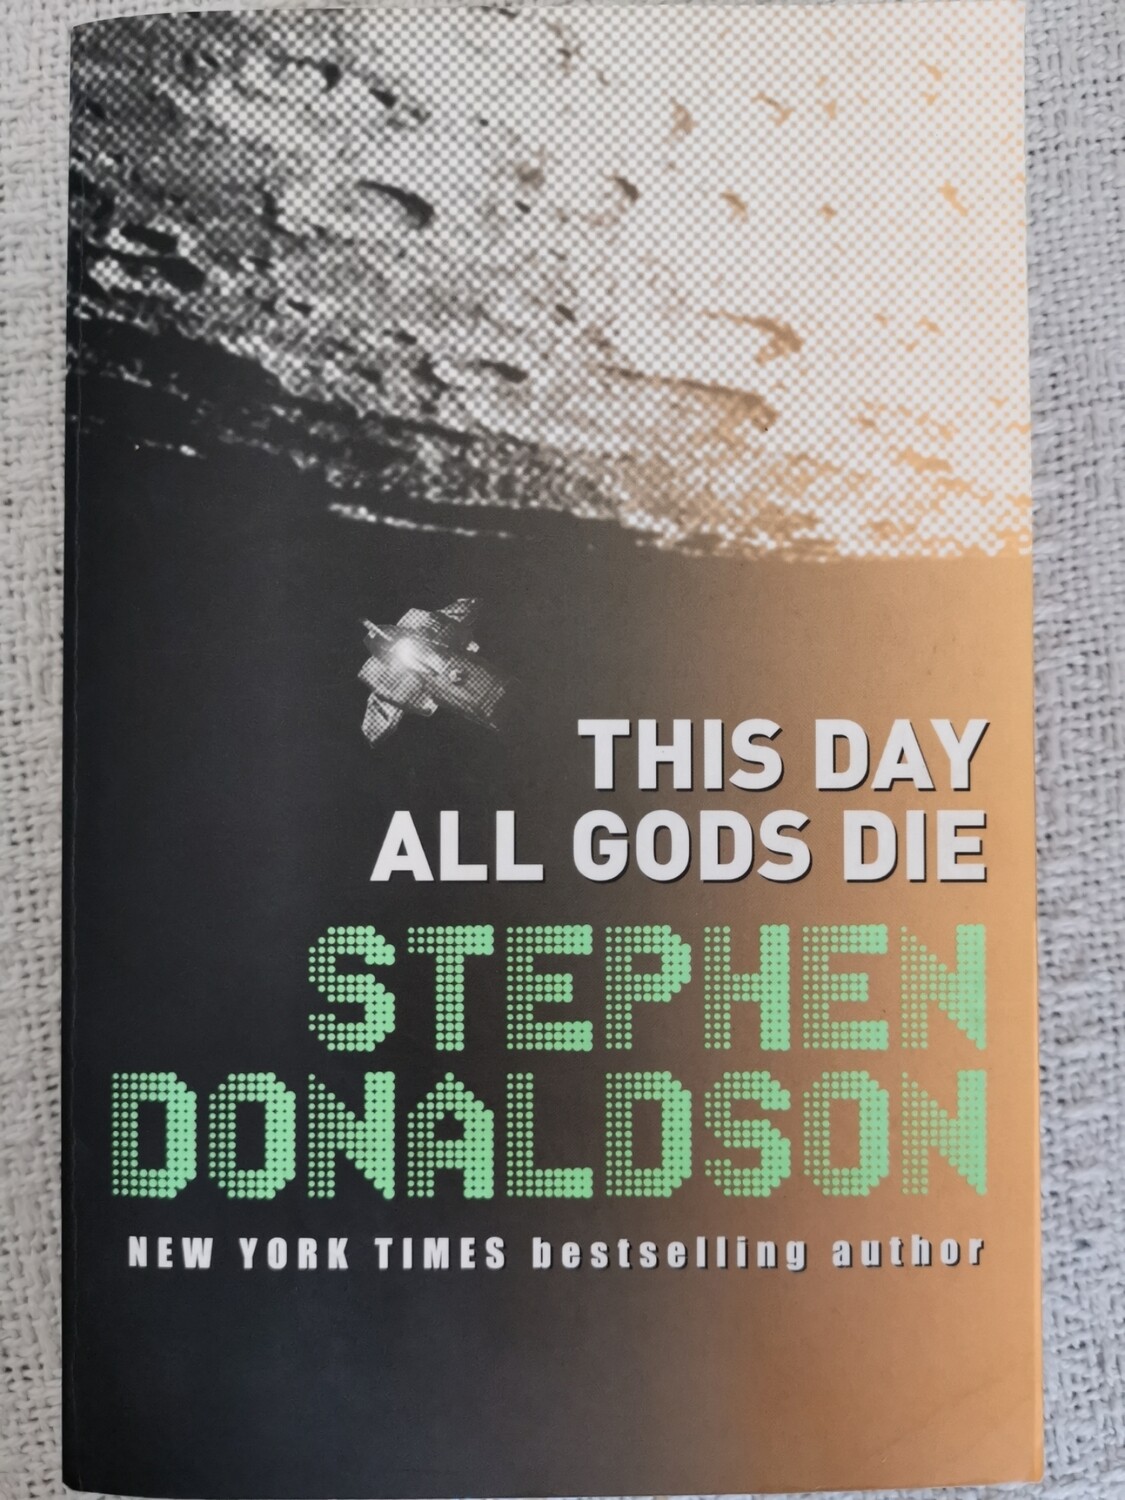 The gap into ruin This day all Gods die, Stephen Donaldson